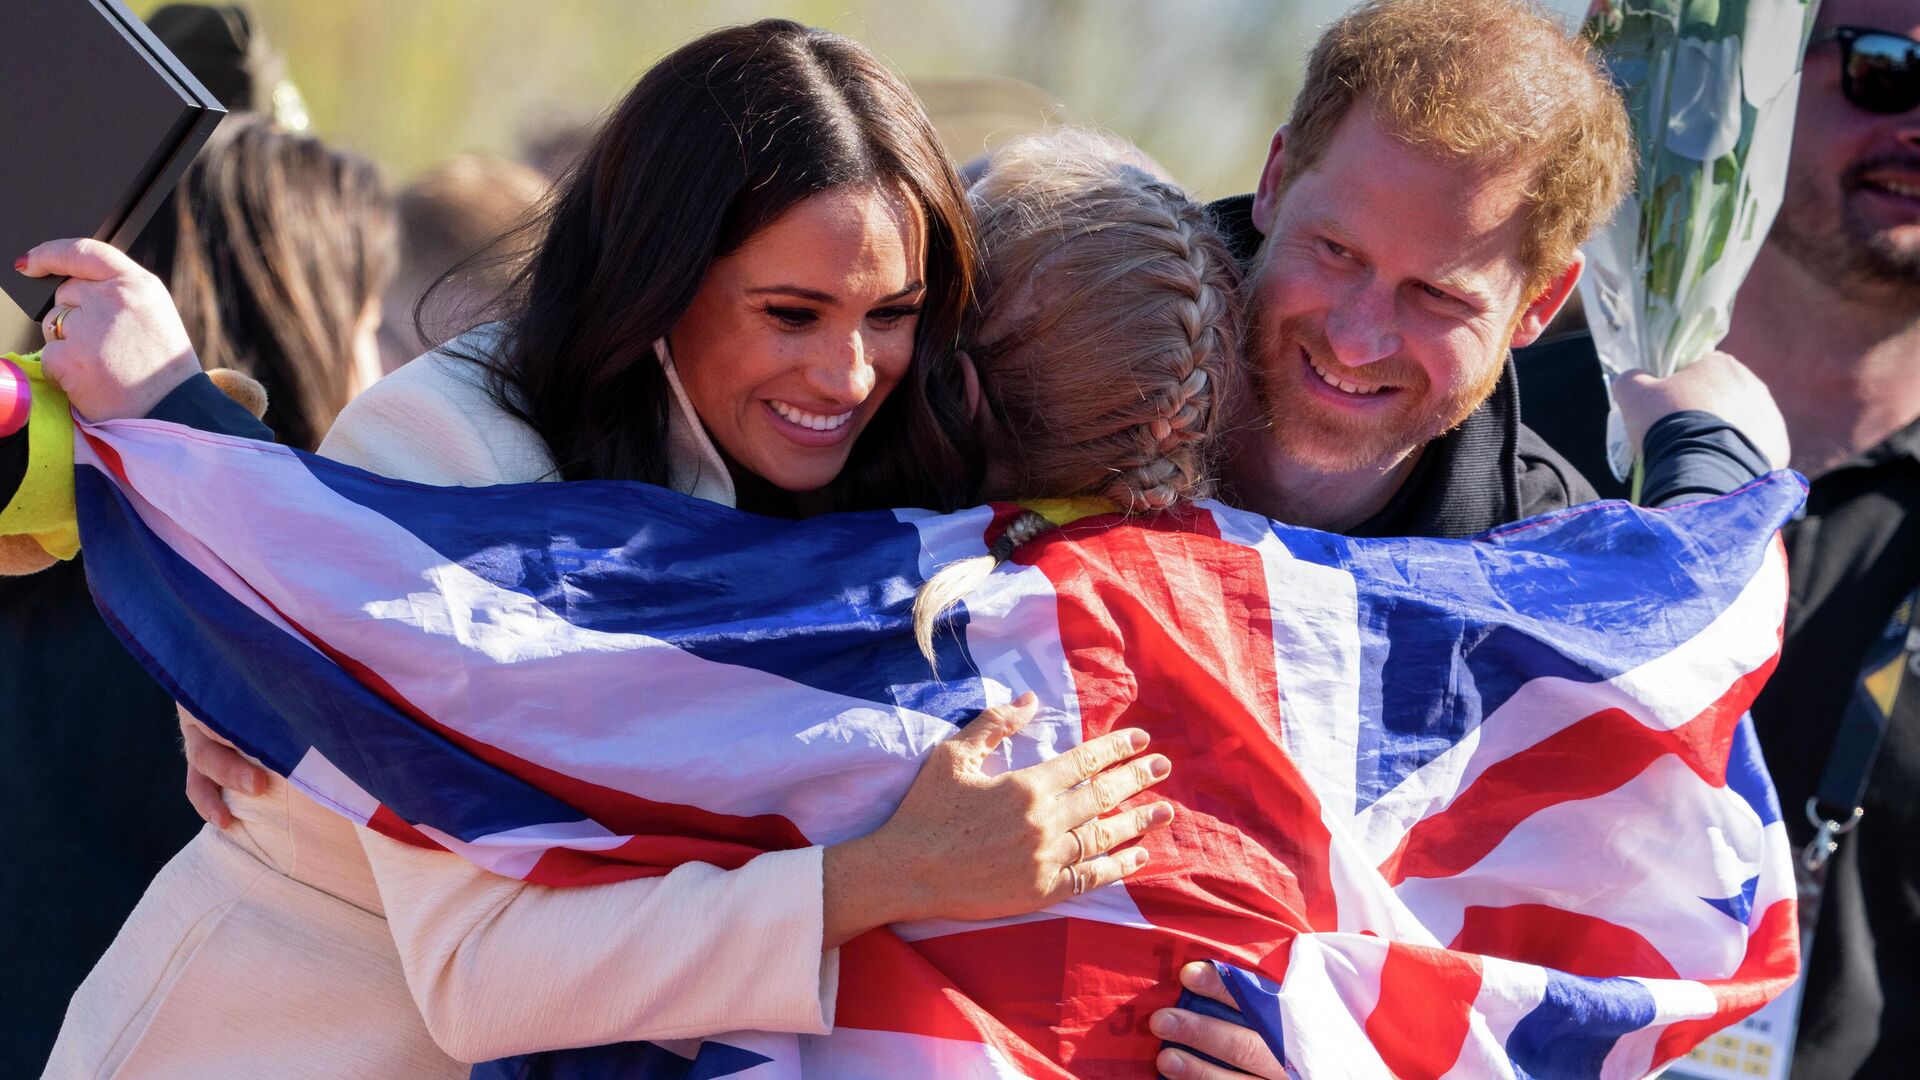 Prince Harry and Meghan Markle, Duke and Duchess of Sussex, hug Lisa Johnston, a former army medic and amputee, who celebrates with her medal at the Invictus Games venue in The Hague, Netherlands, Sunday, April 17, 2022 - Sputnik International, 1920, 22.04.2022